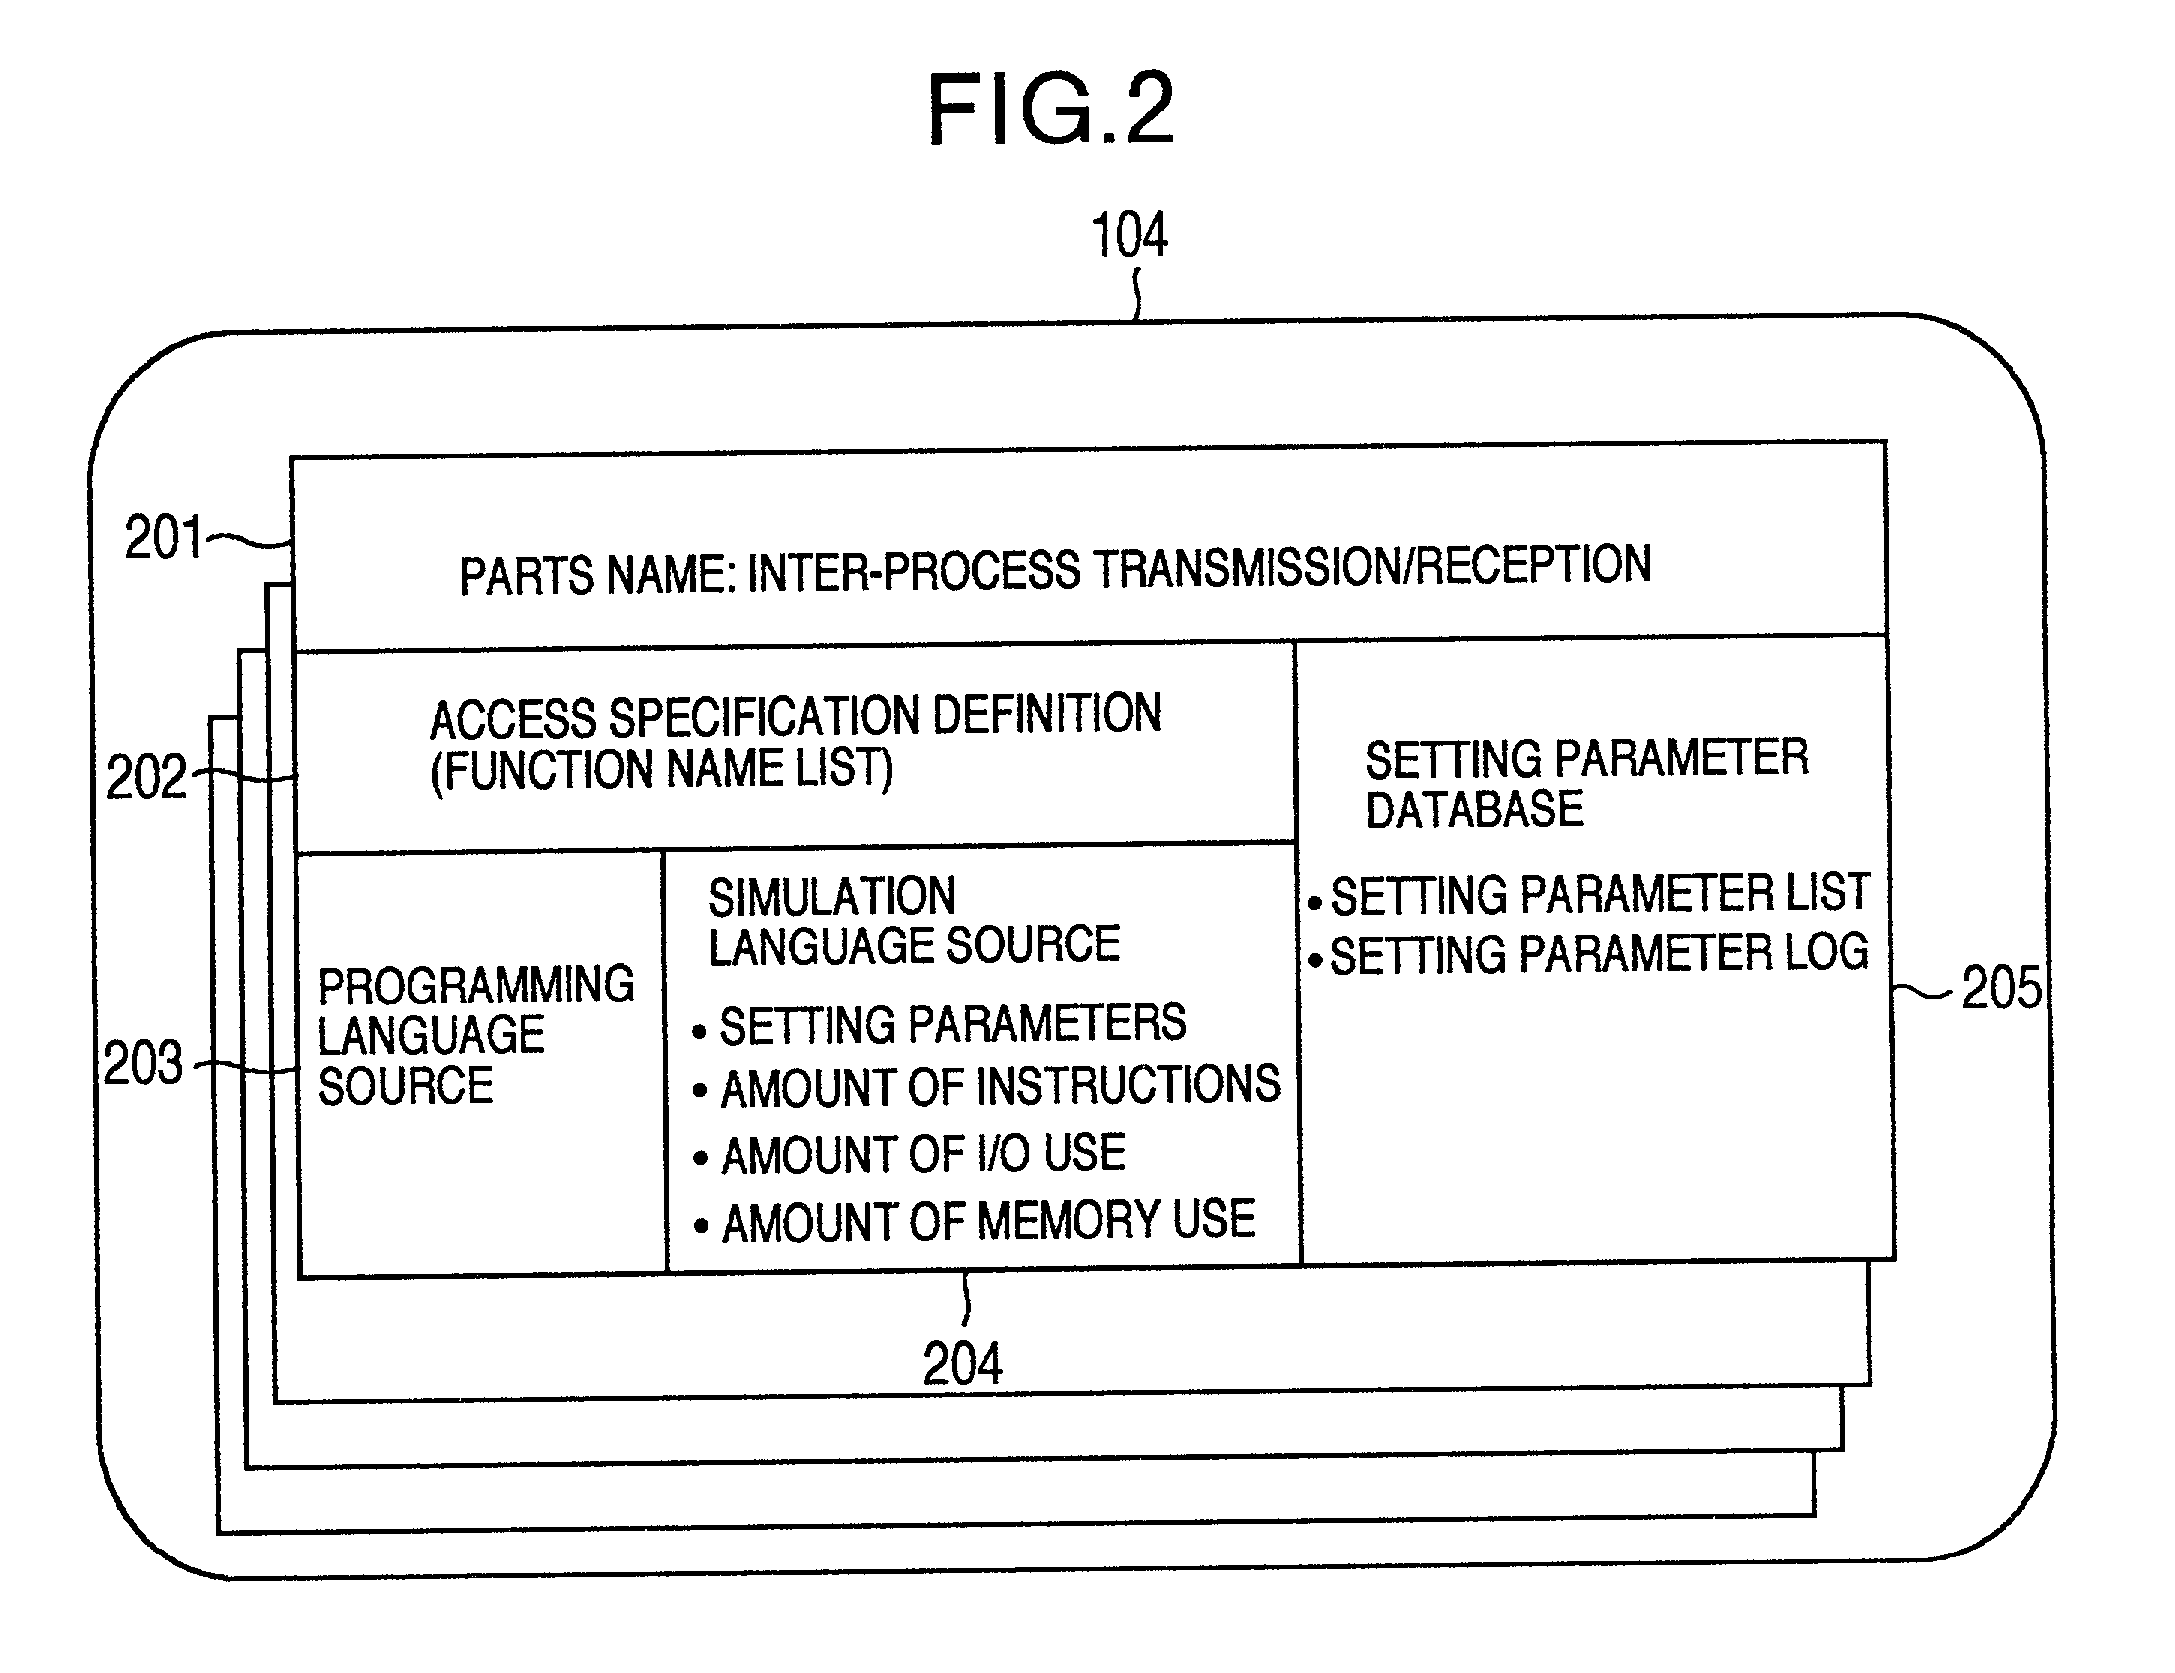 Method for creating a performance model of an application program adjusted with an execution result of the application program